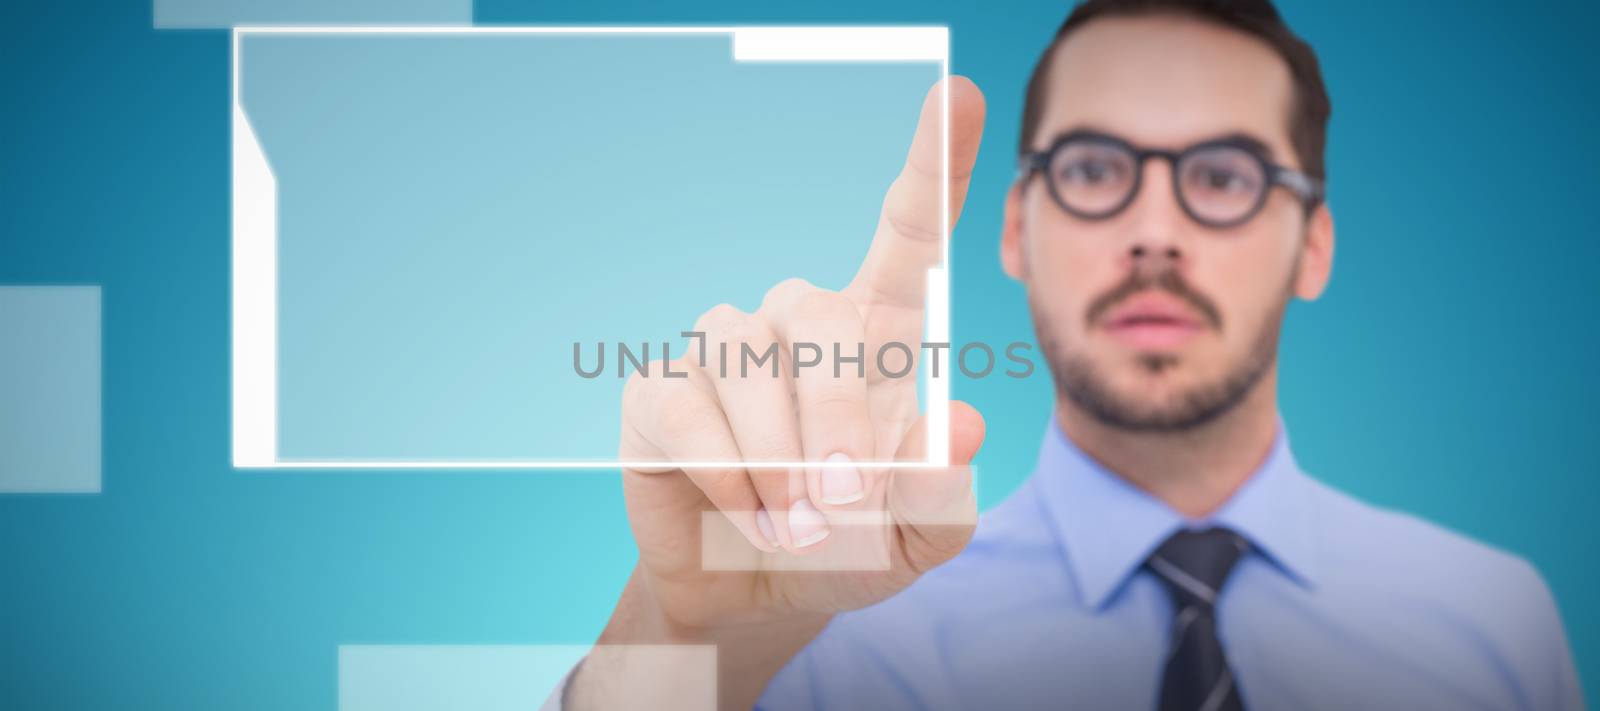 Businessman with glasses pointing something against abstract blue background